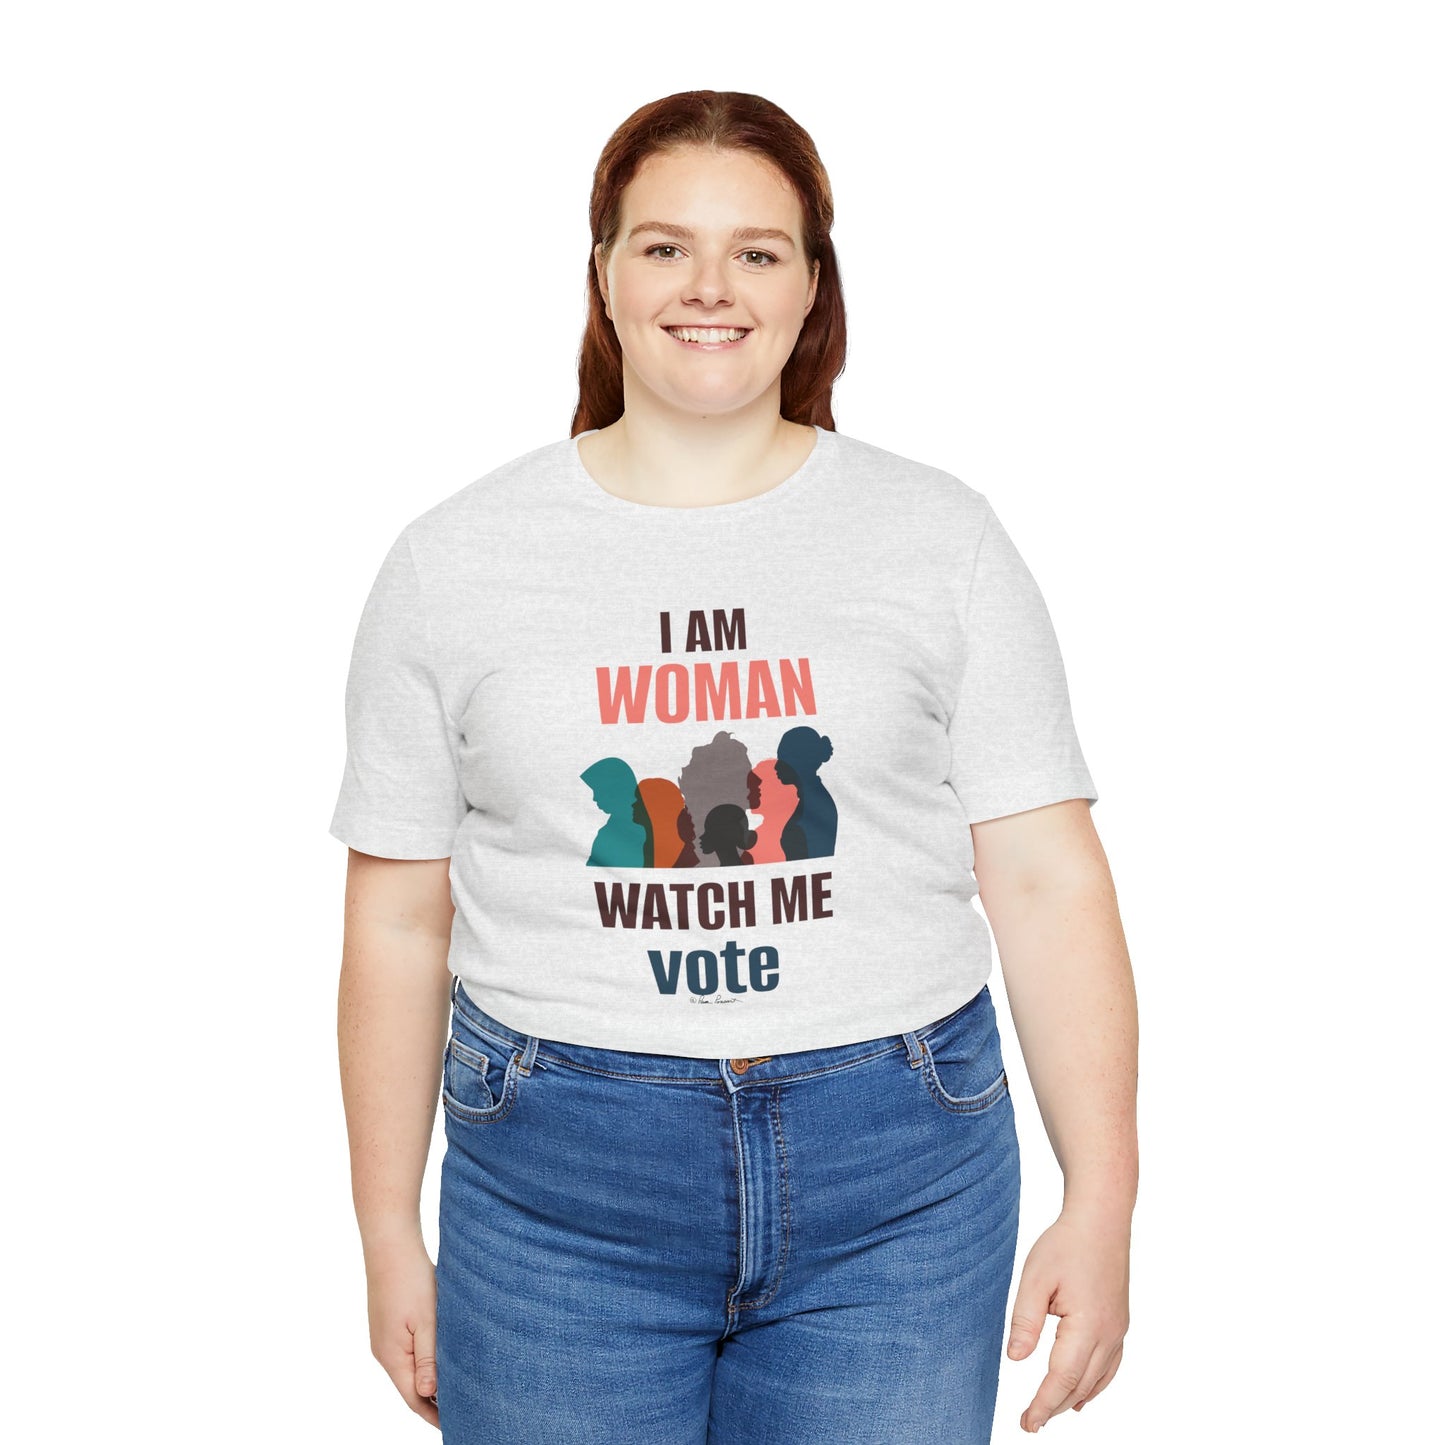 Woman in a "Unisex Cotton Jersey T-shirt by Bella+Canvas" with "i am woman watch me vote" and silhouette graphics, paired with blue jeans, smiling at the camera.